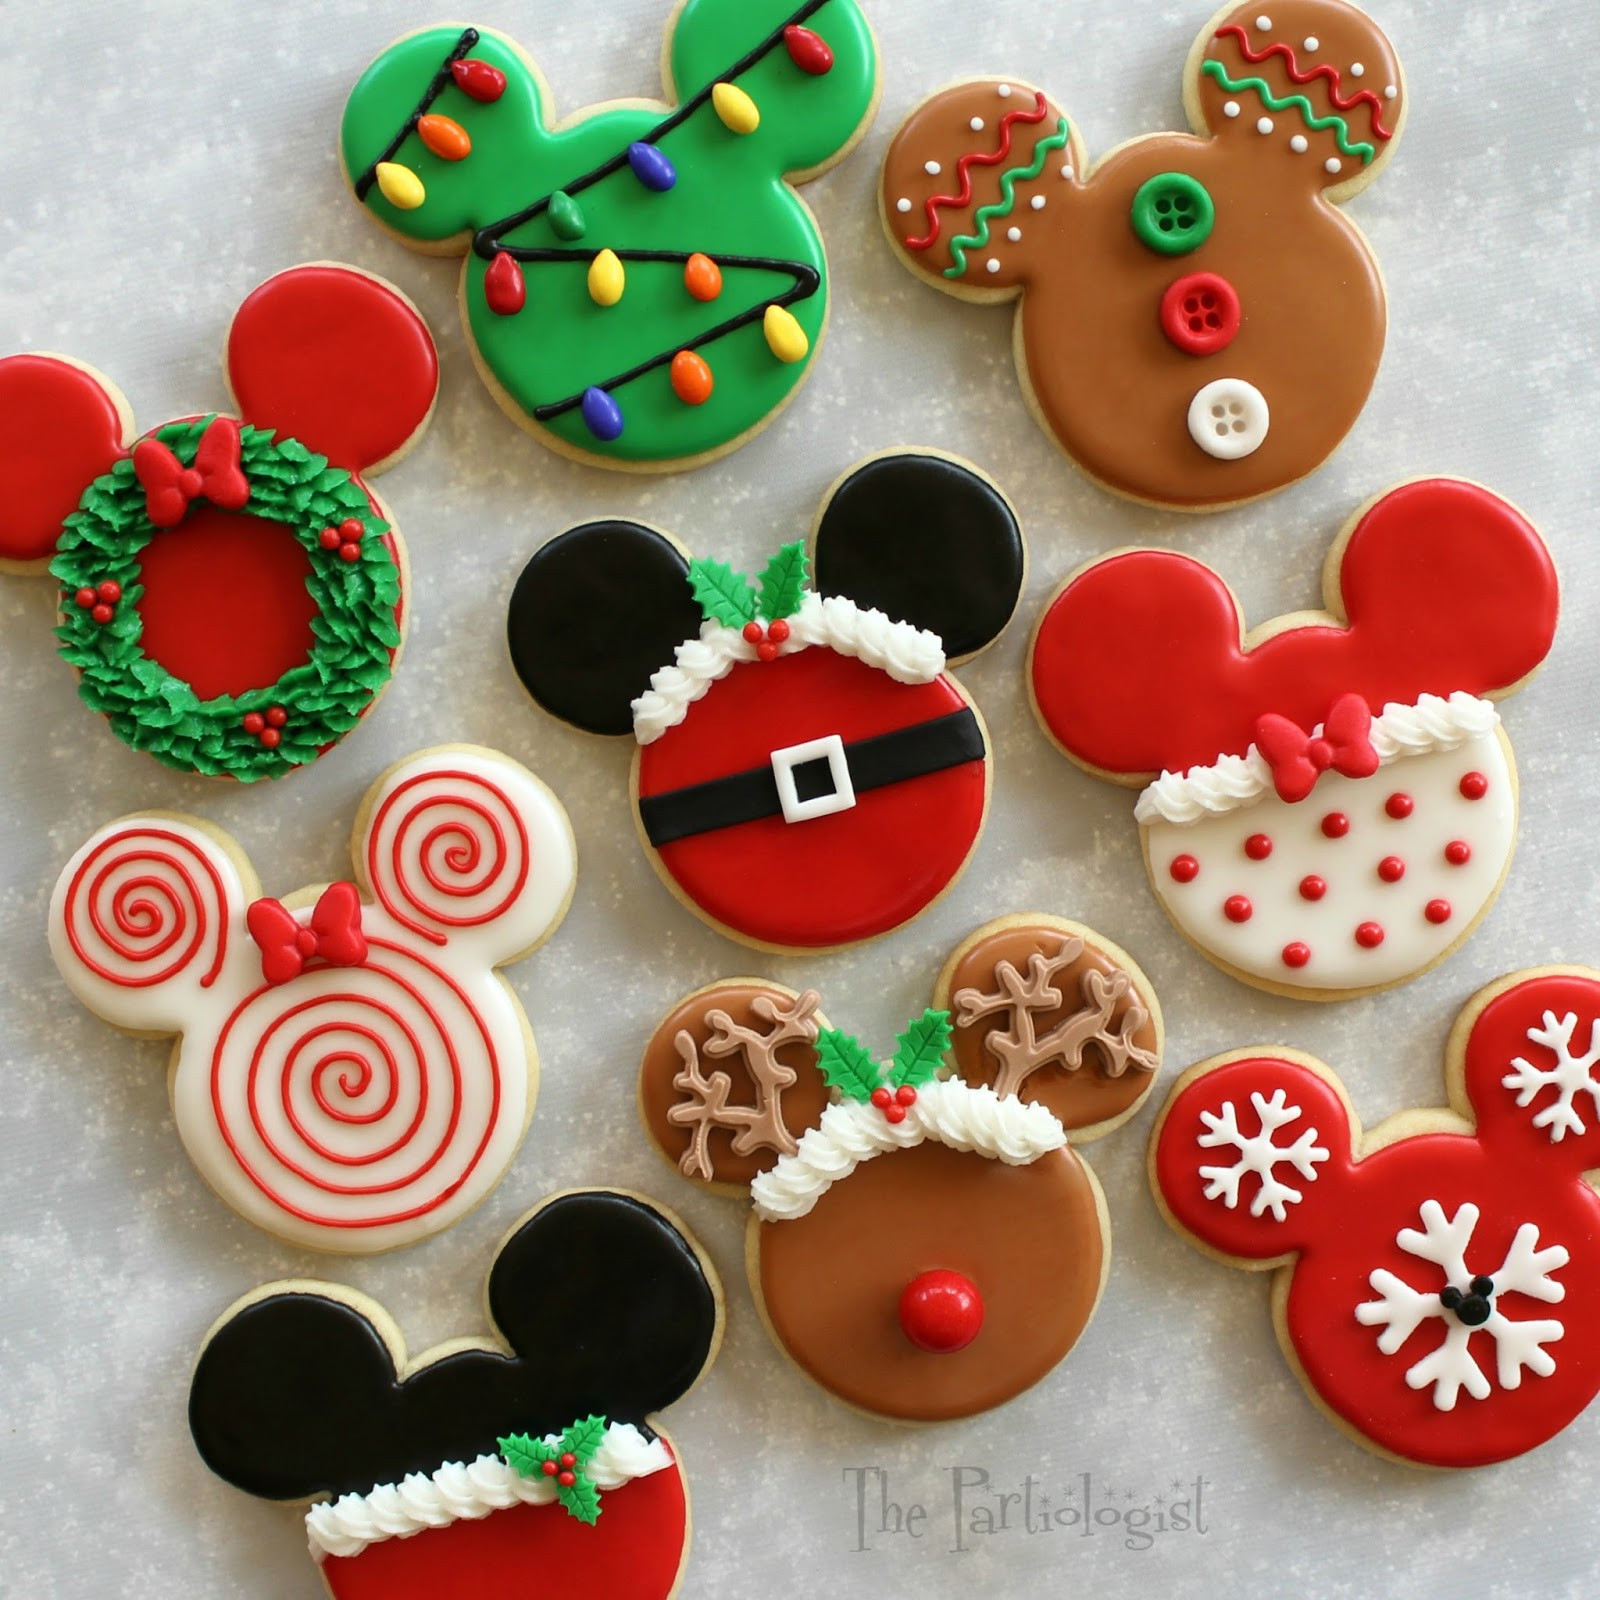 Mickey Christmas Cookies
 The Partiologist Disney Themed Christmas Cookies